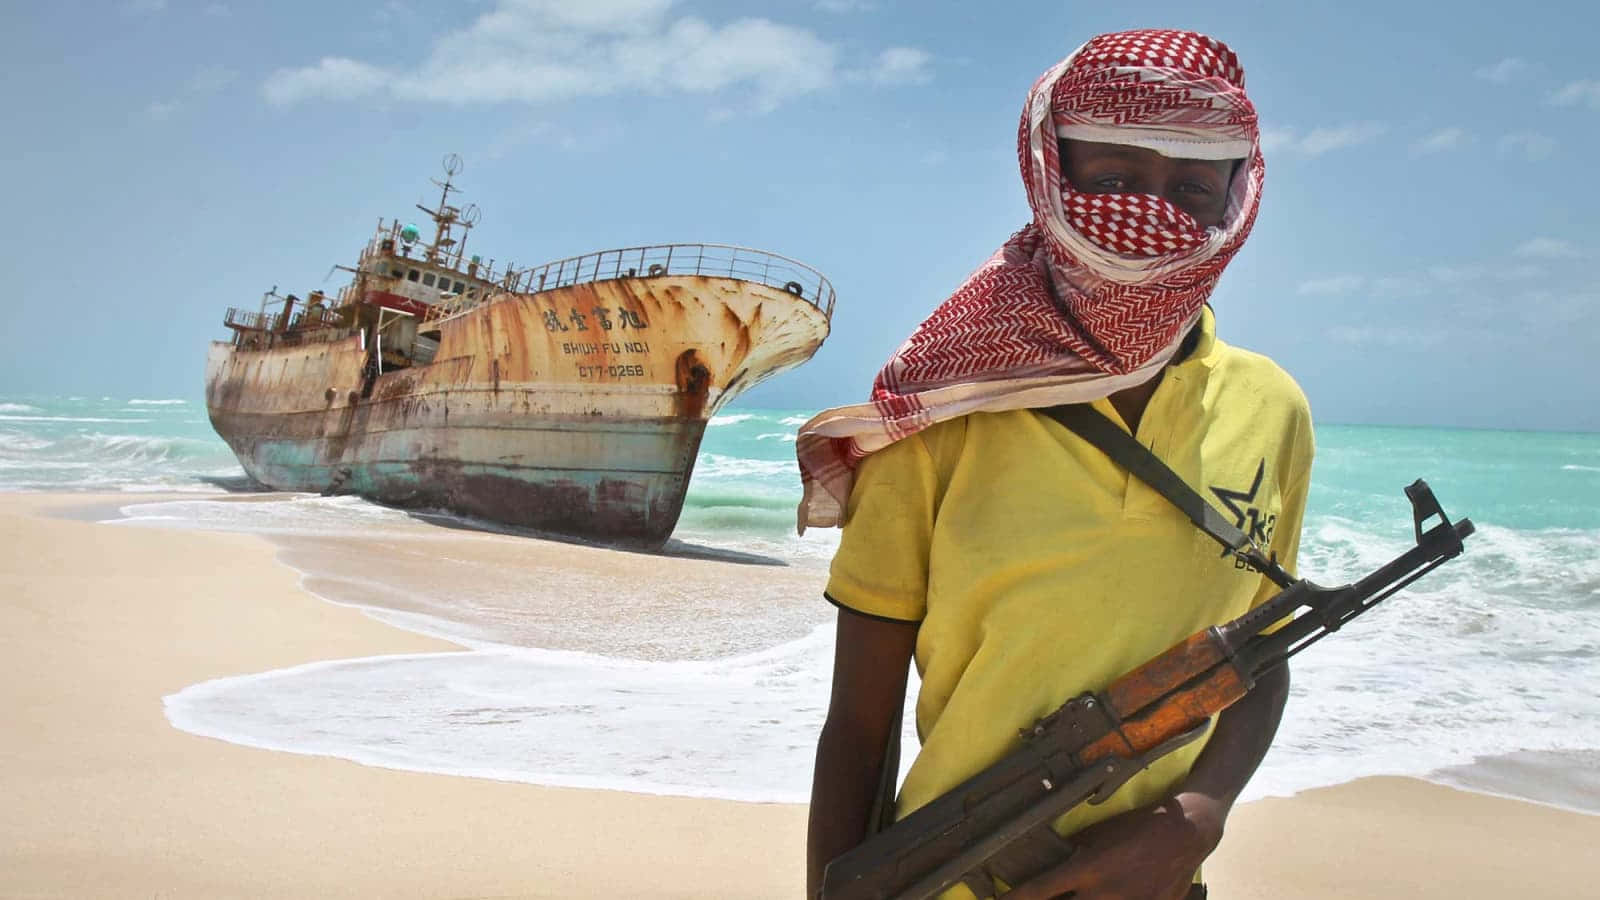 Armed Real Pirate Of Somalia Picture